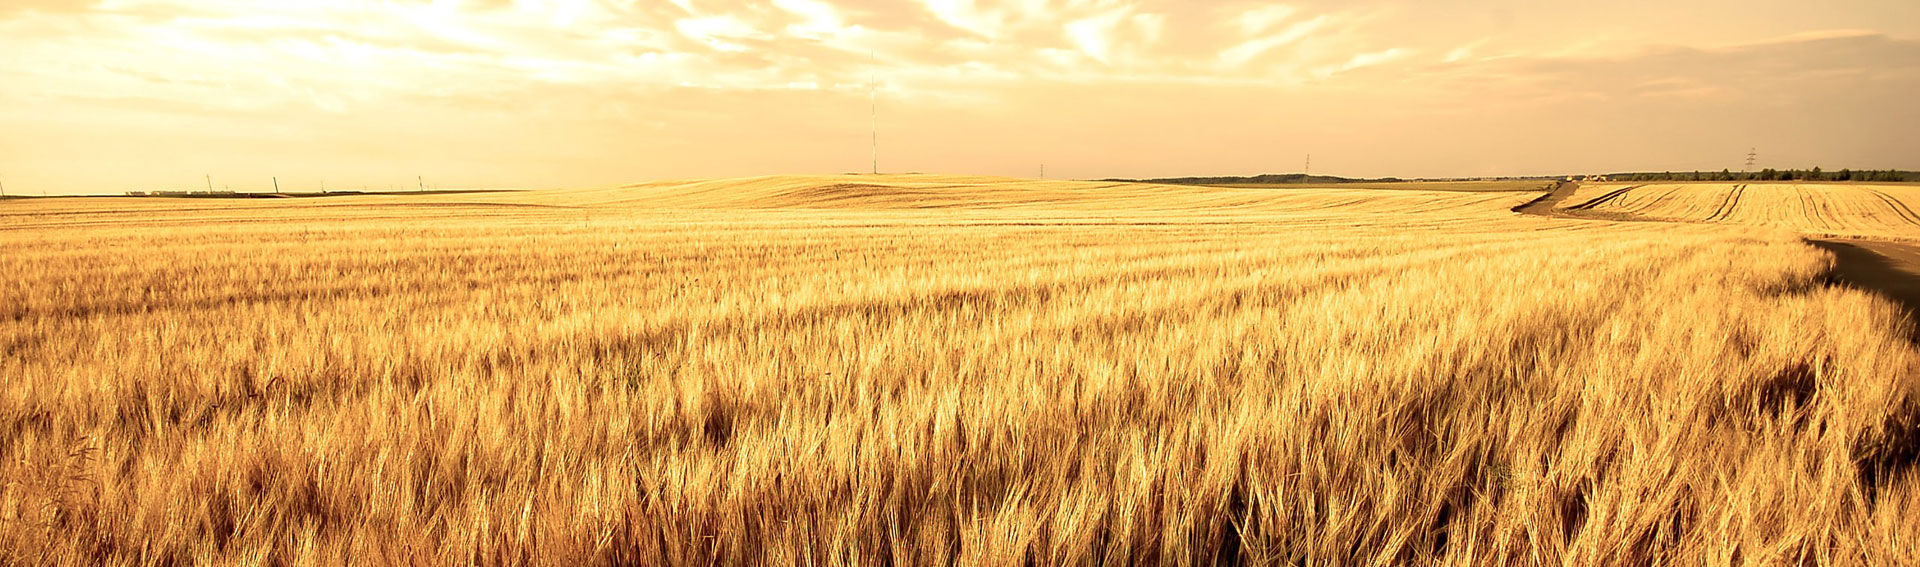 wheat field at dusk with golden sky